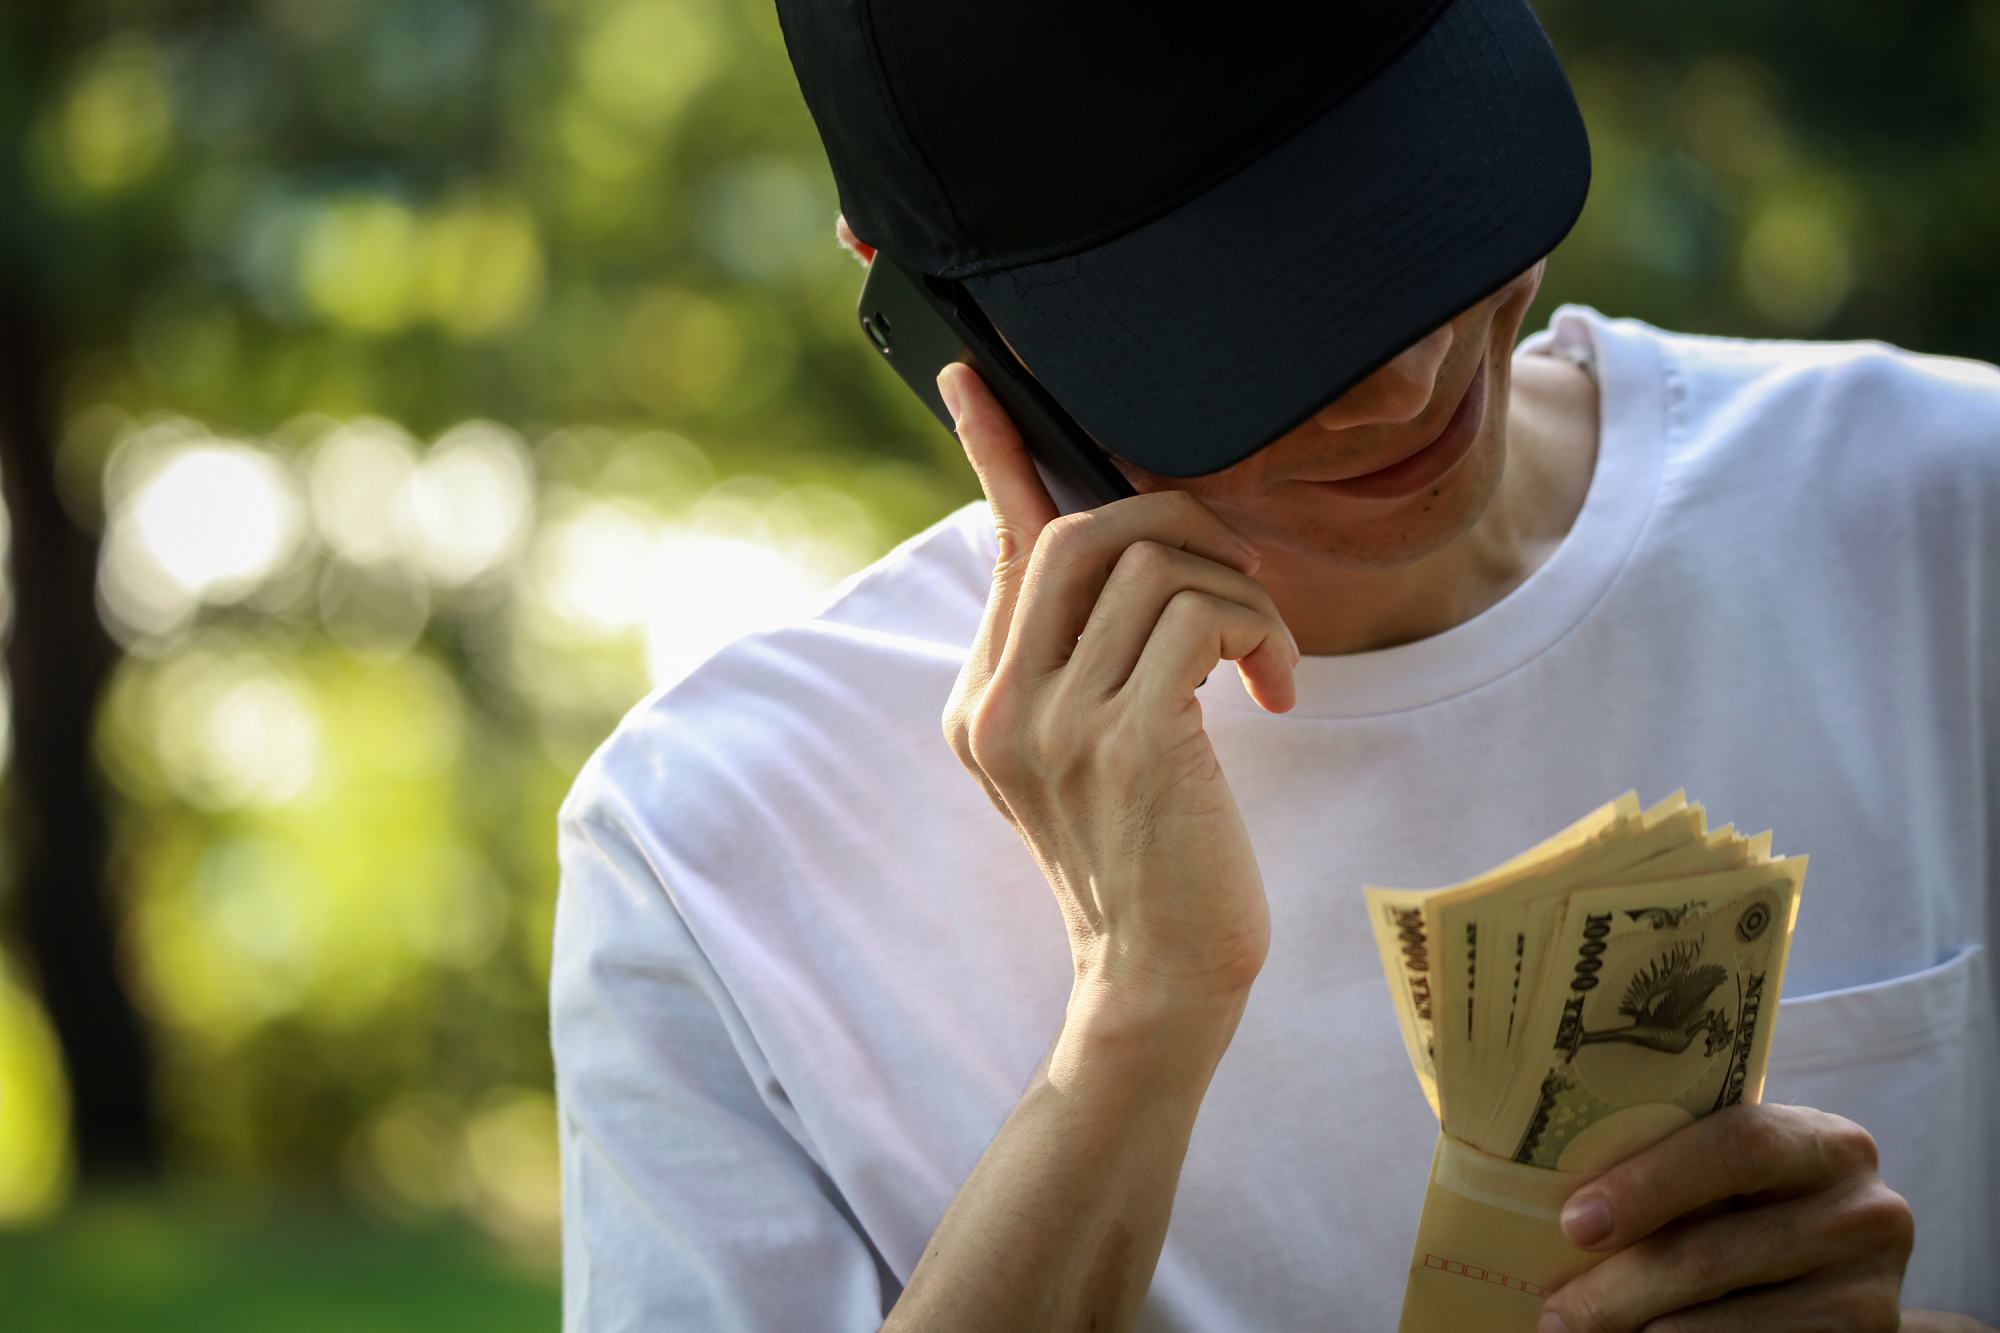 A young man talks on a cell phone while looking at an envelope filled with Japanese banknotes.